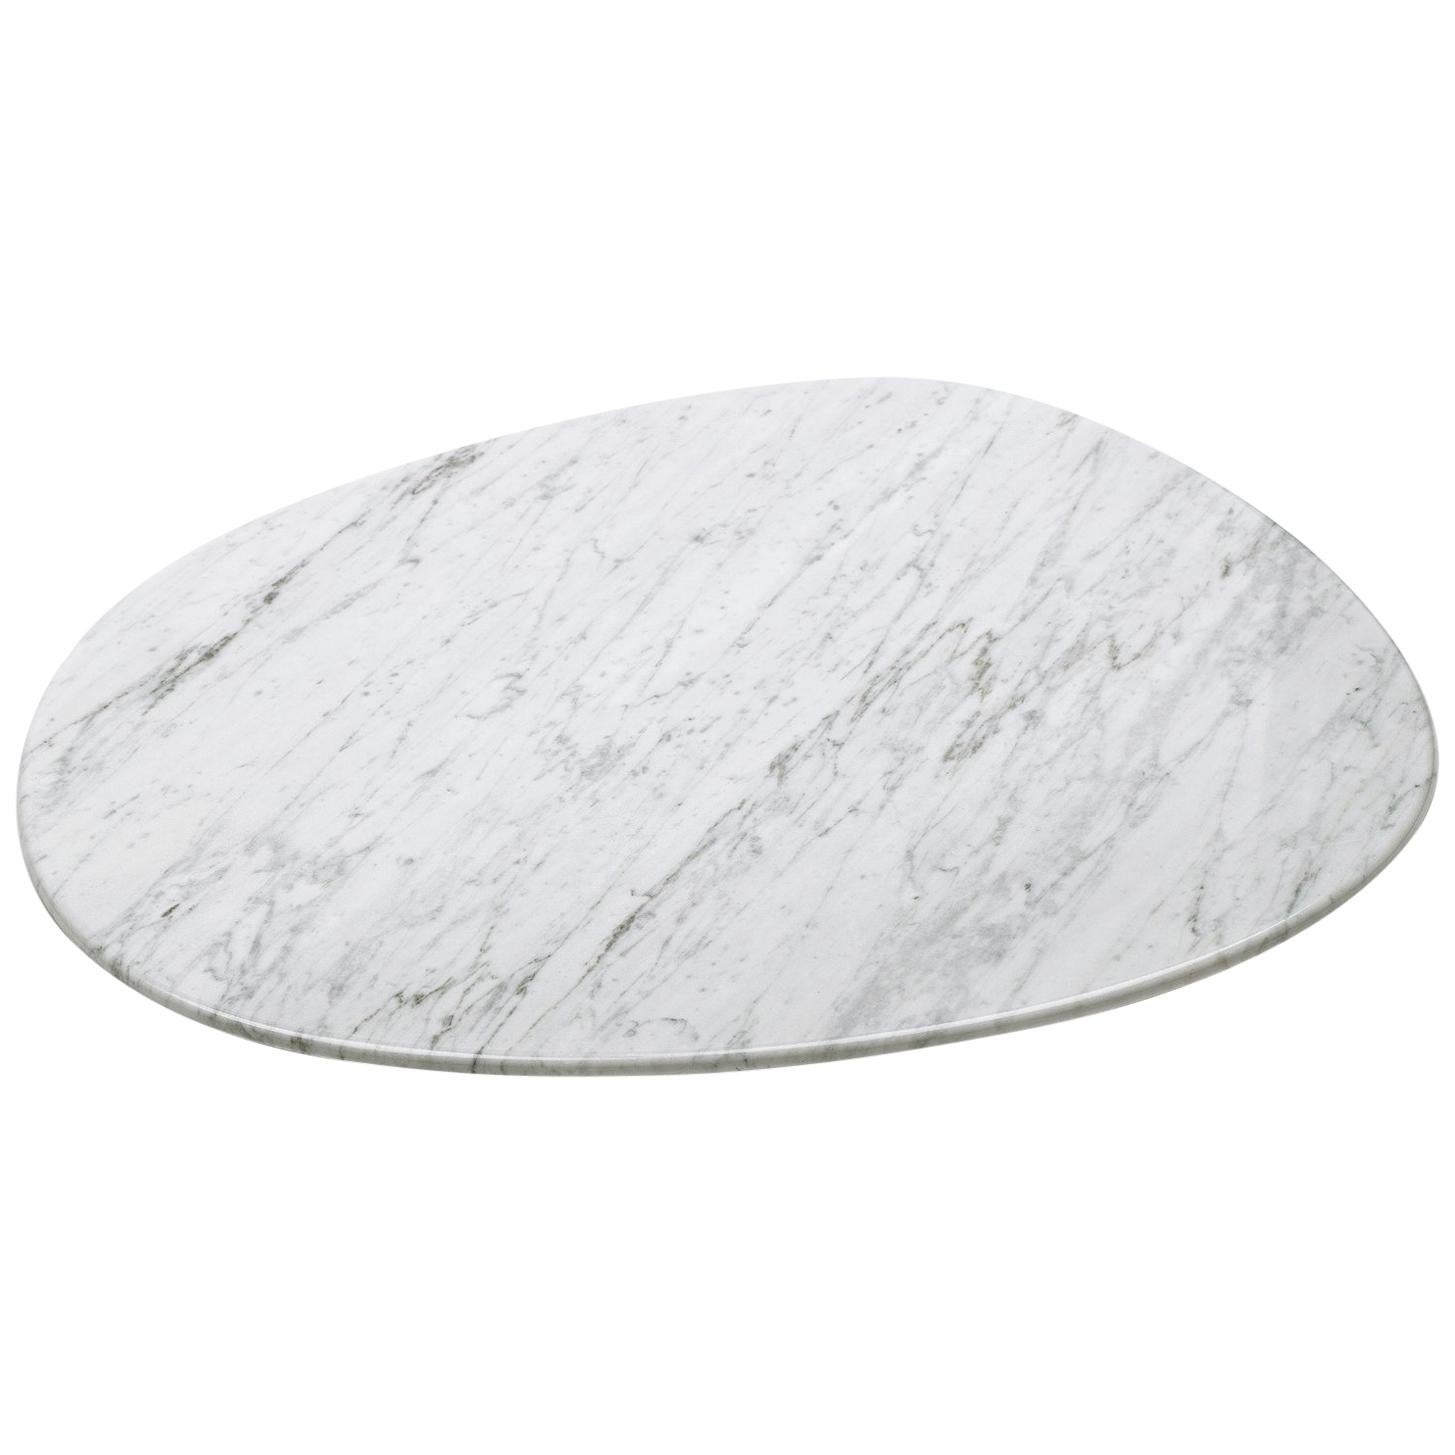 Oval plate in White Carrara Marble Handcrafted in Italy design by Boucquillon